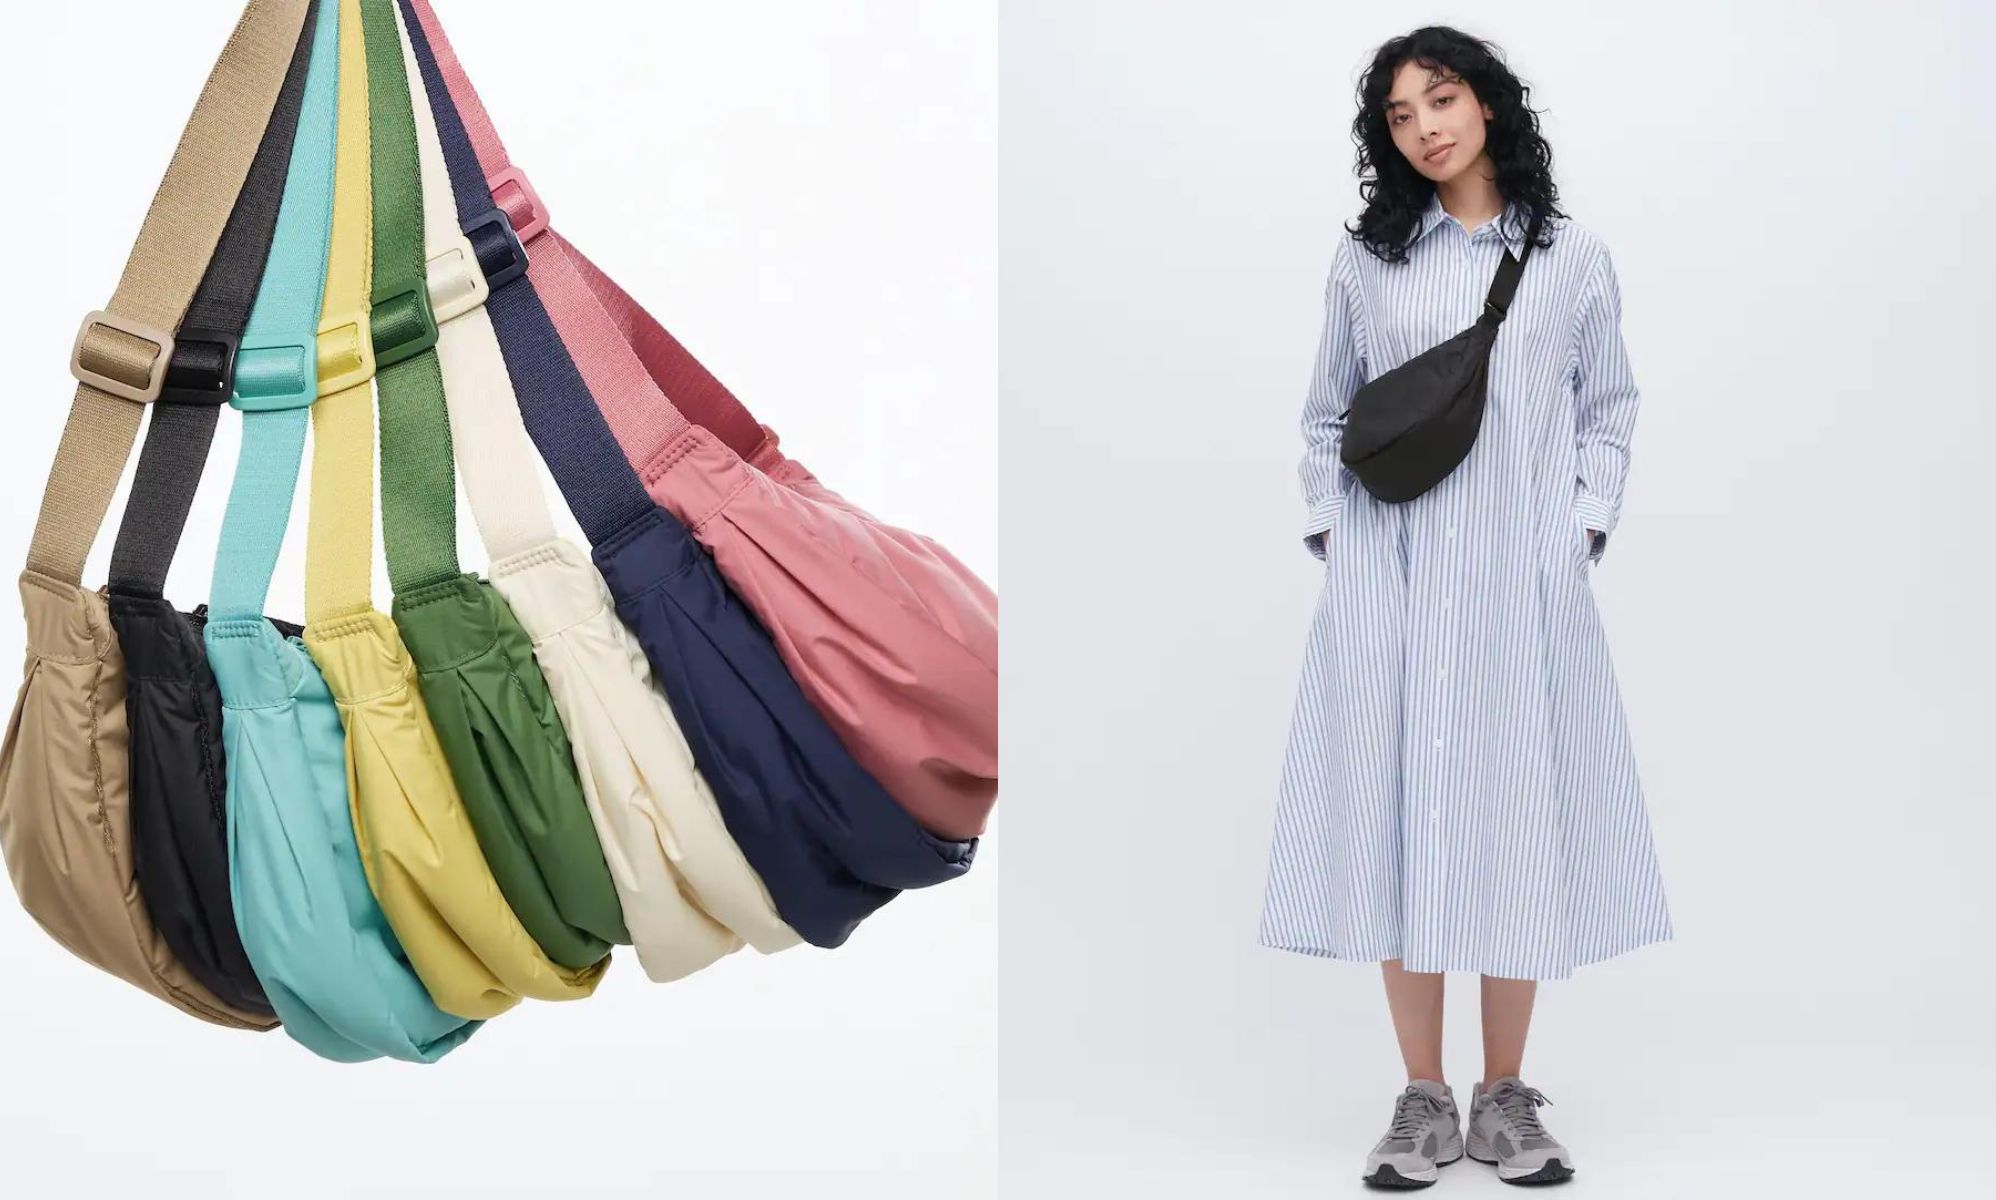 Uniqlo's Shoulder Bag Is Officially 2023's Hottest Item